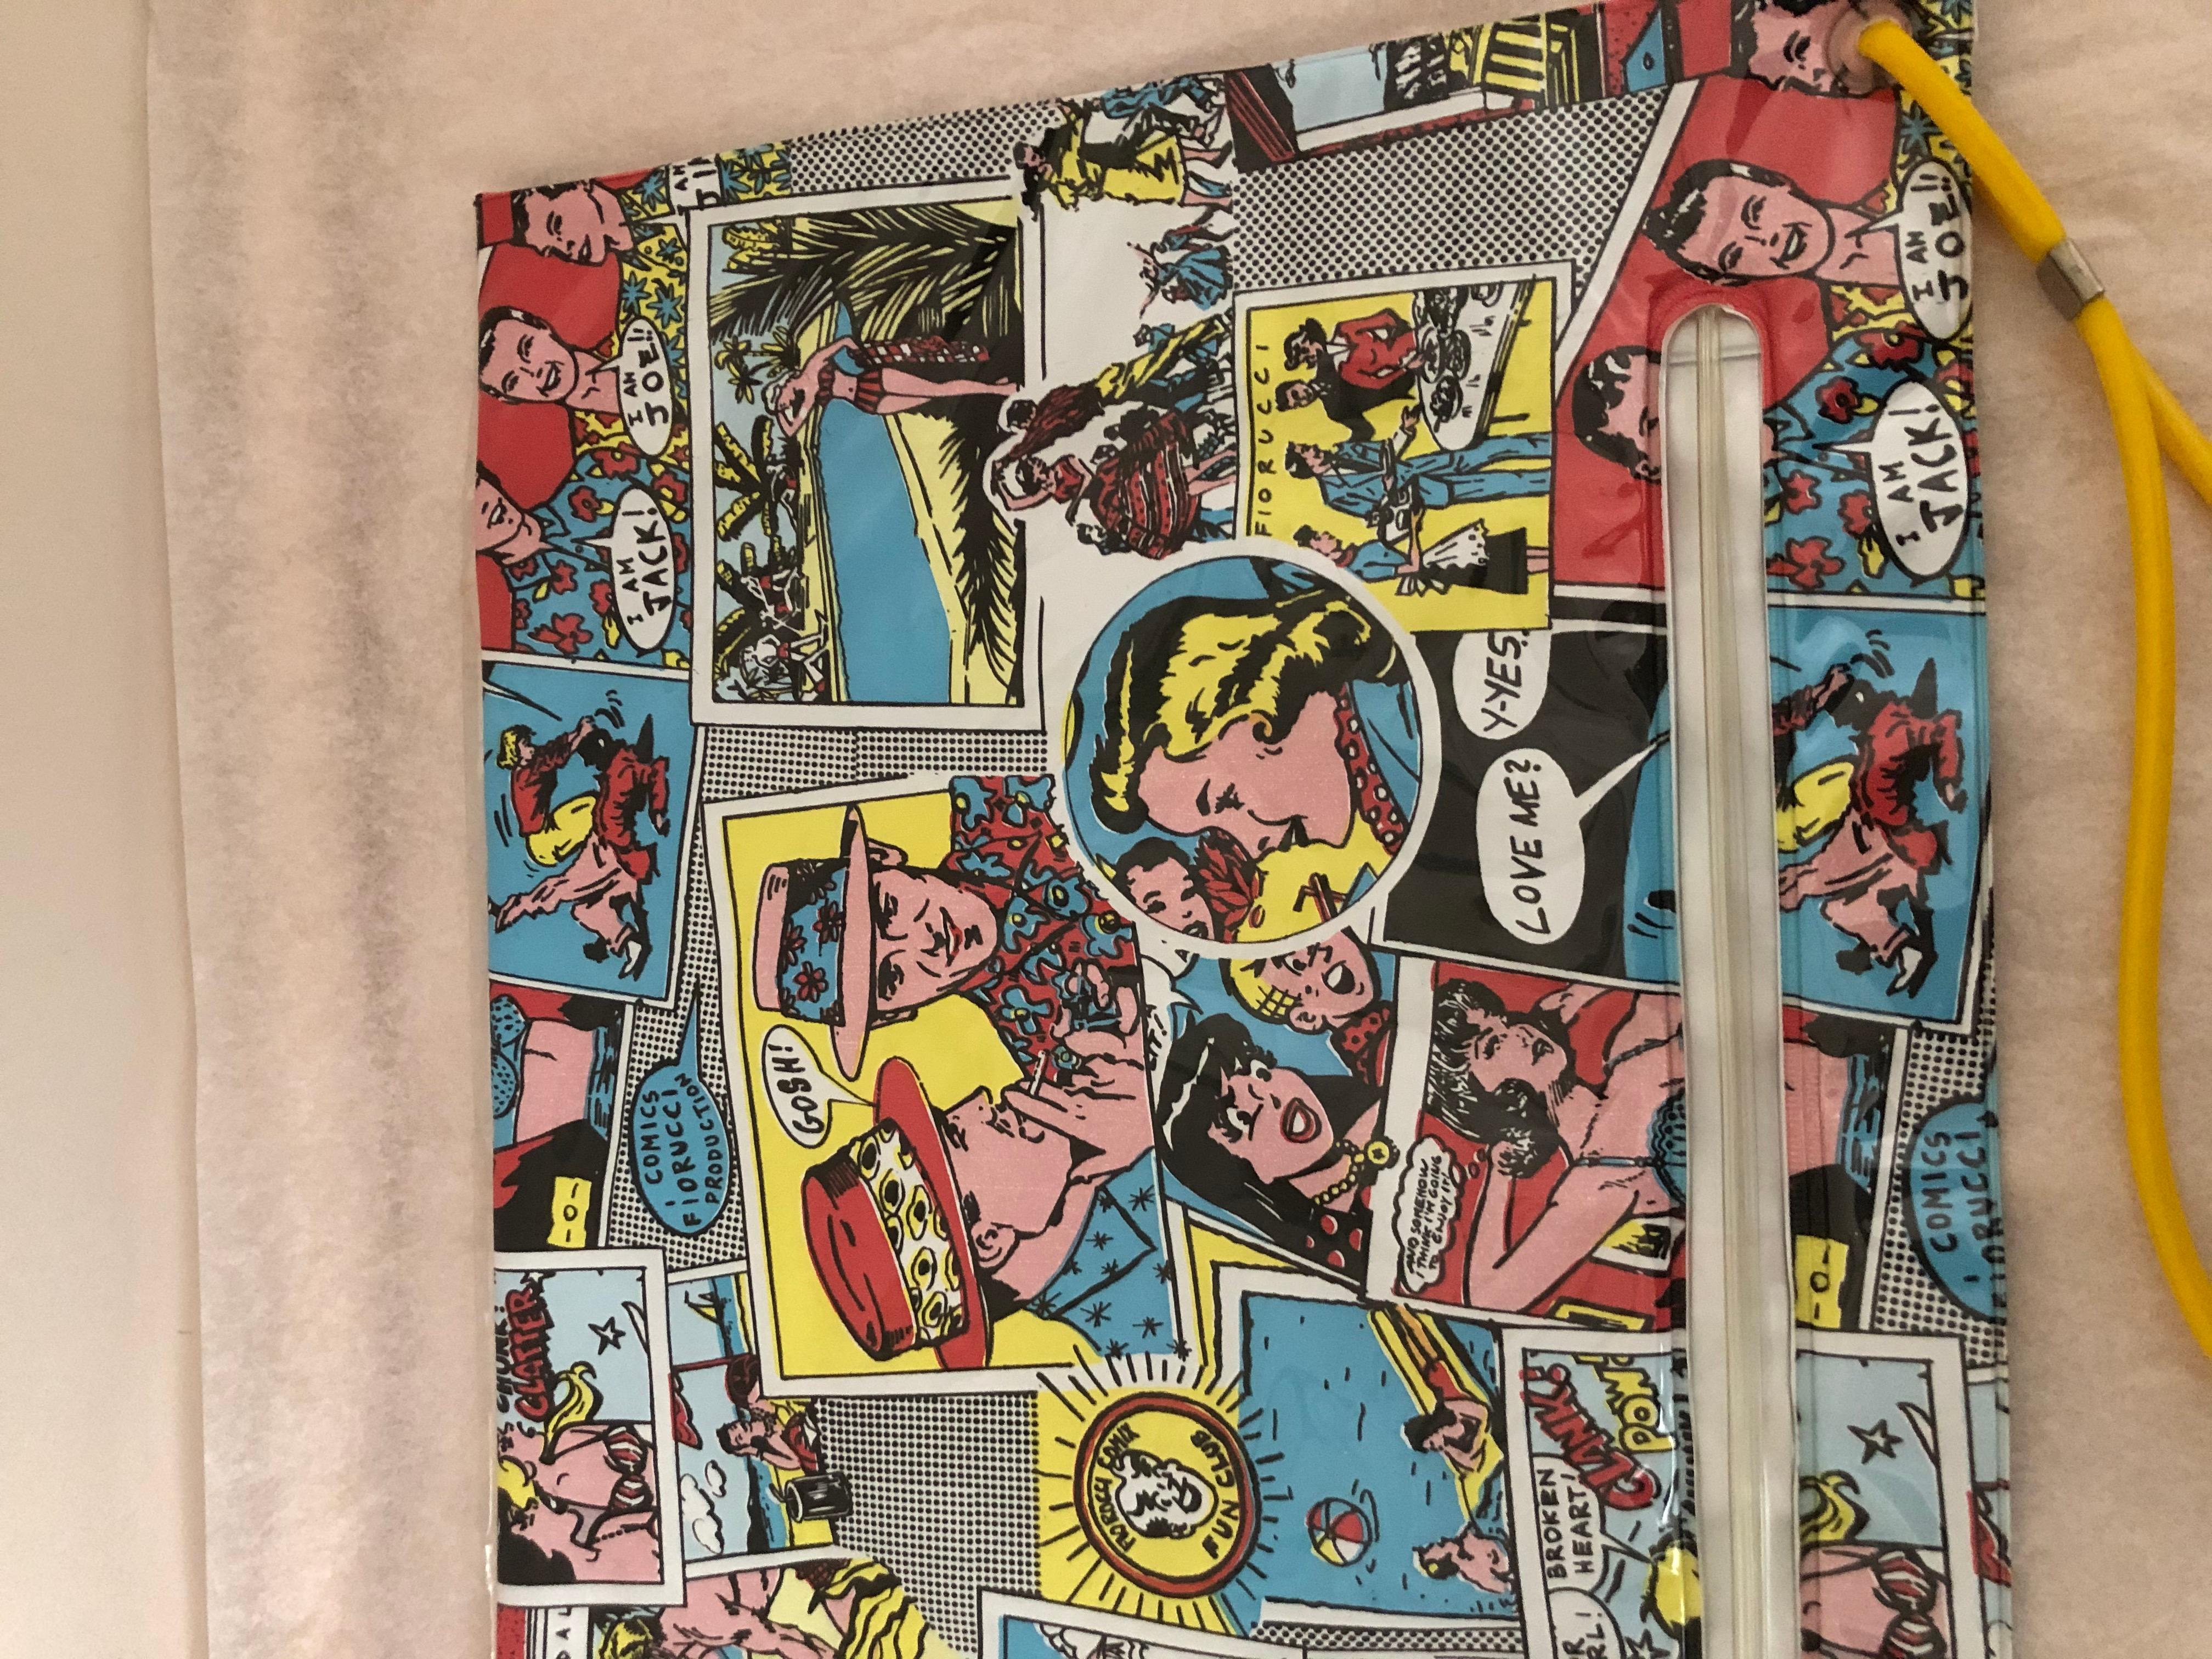 This is a unique piece and most everybody knows of the Archie Comics. This is not only a clutch but iconic images with a pop art look. There is a top zip closure, as well as a zip pocket at the front.
The colors are bright and fresh, and this clutch